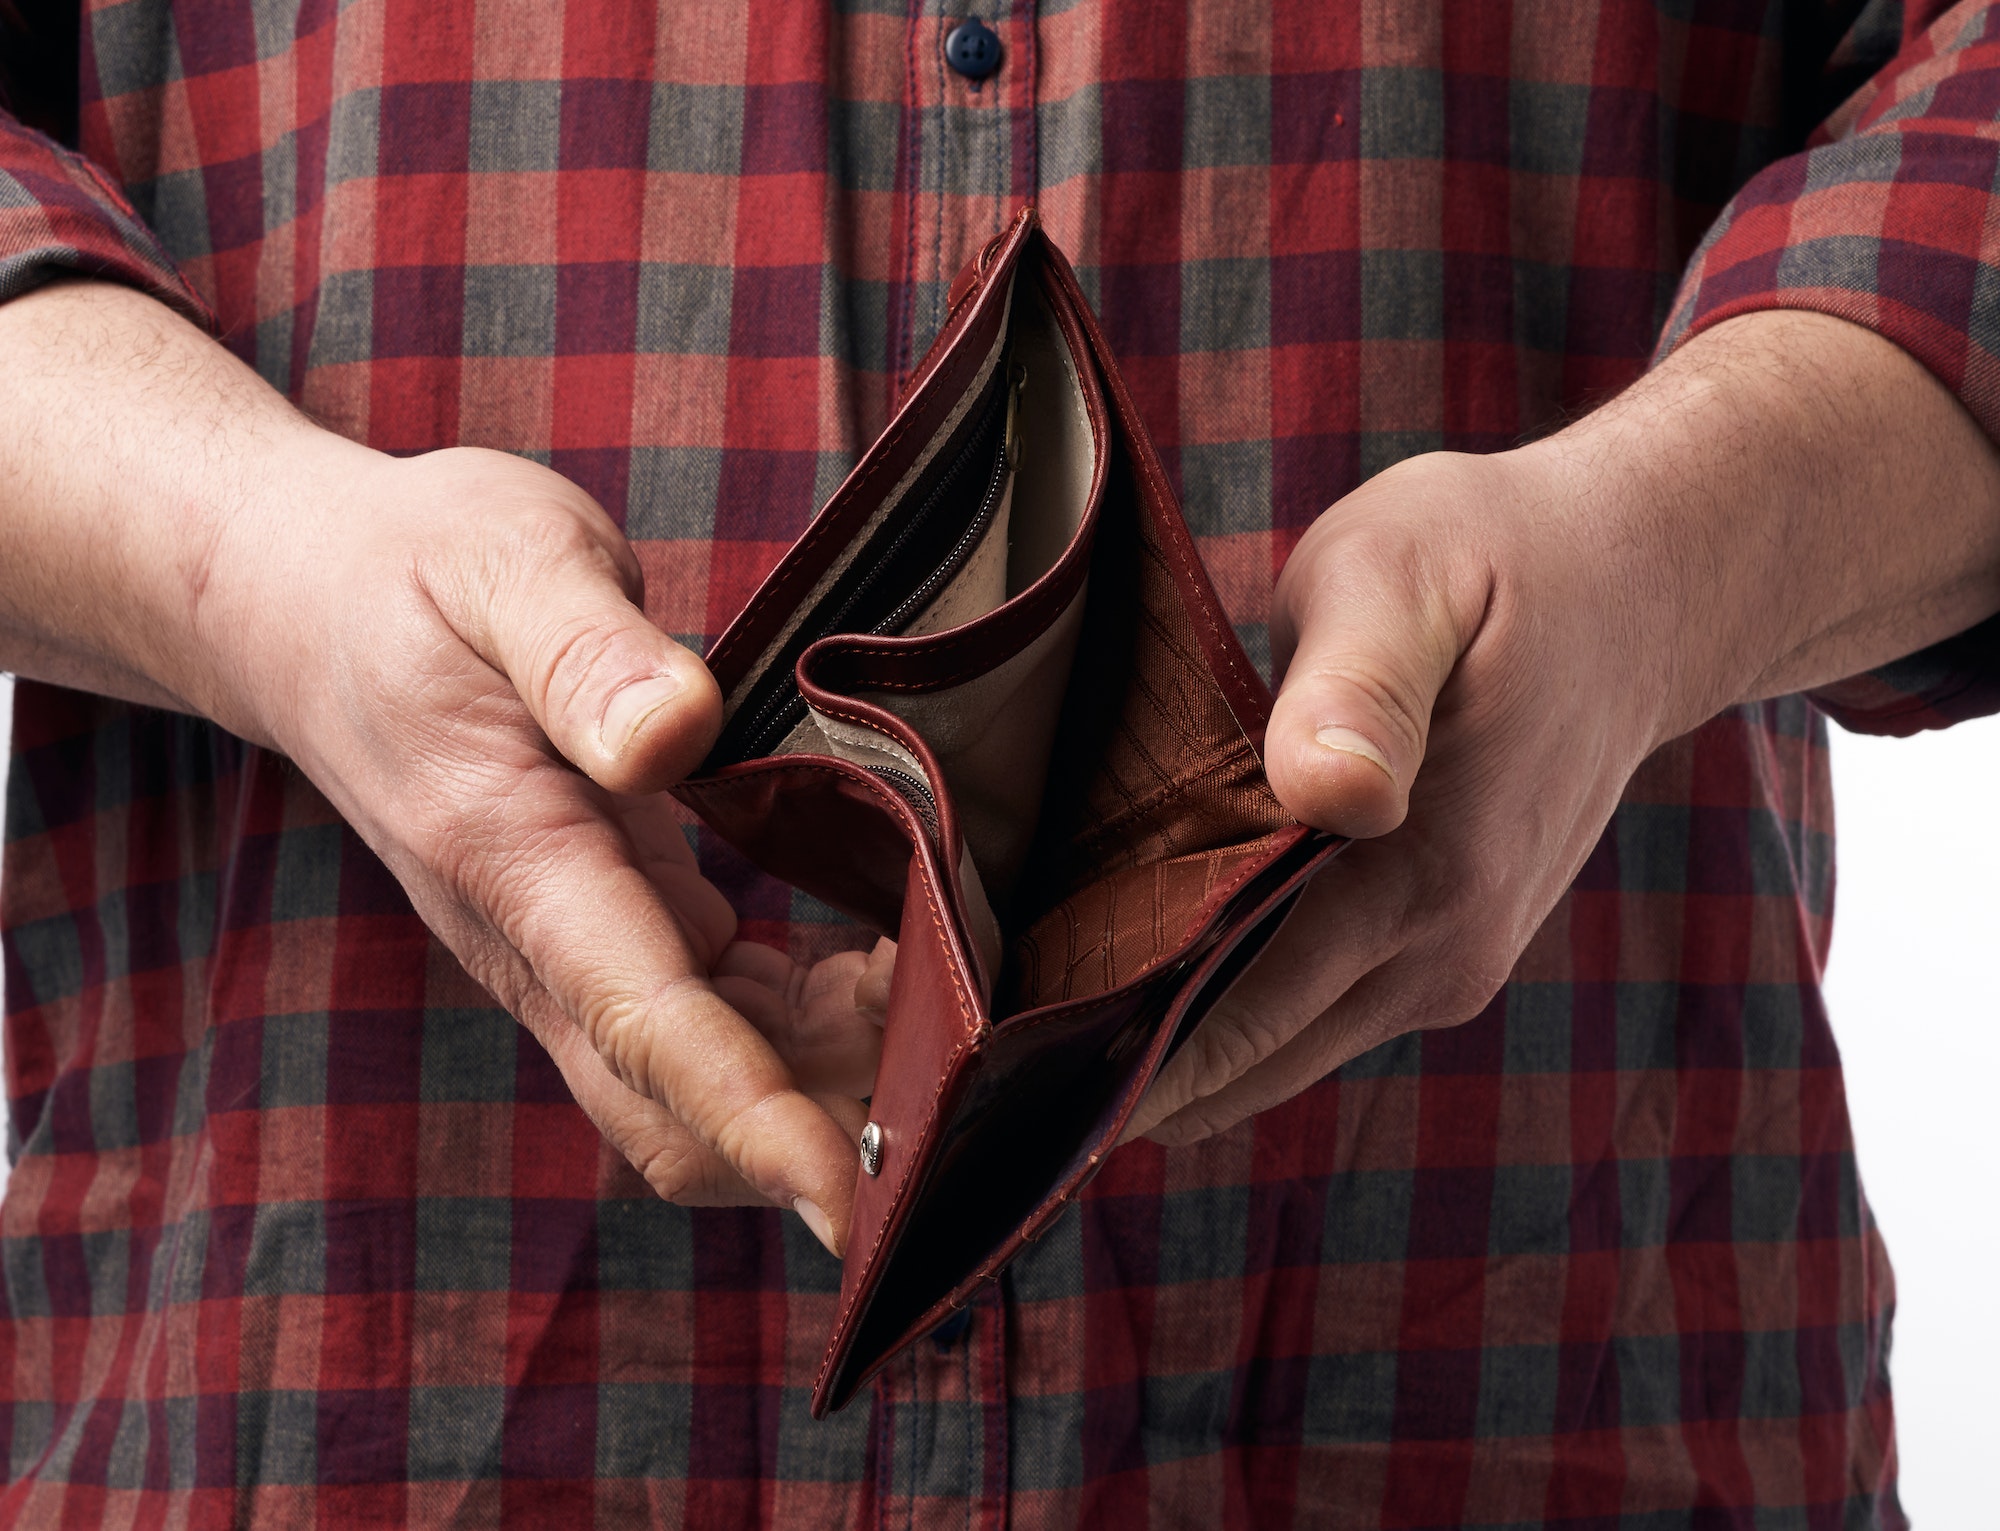 Man in a red plaid shirt holds an empty leather brown wallet